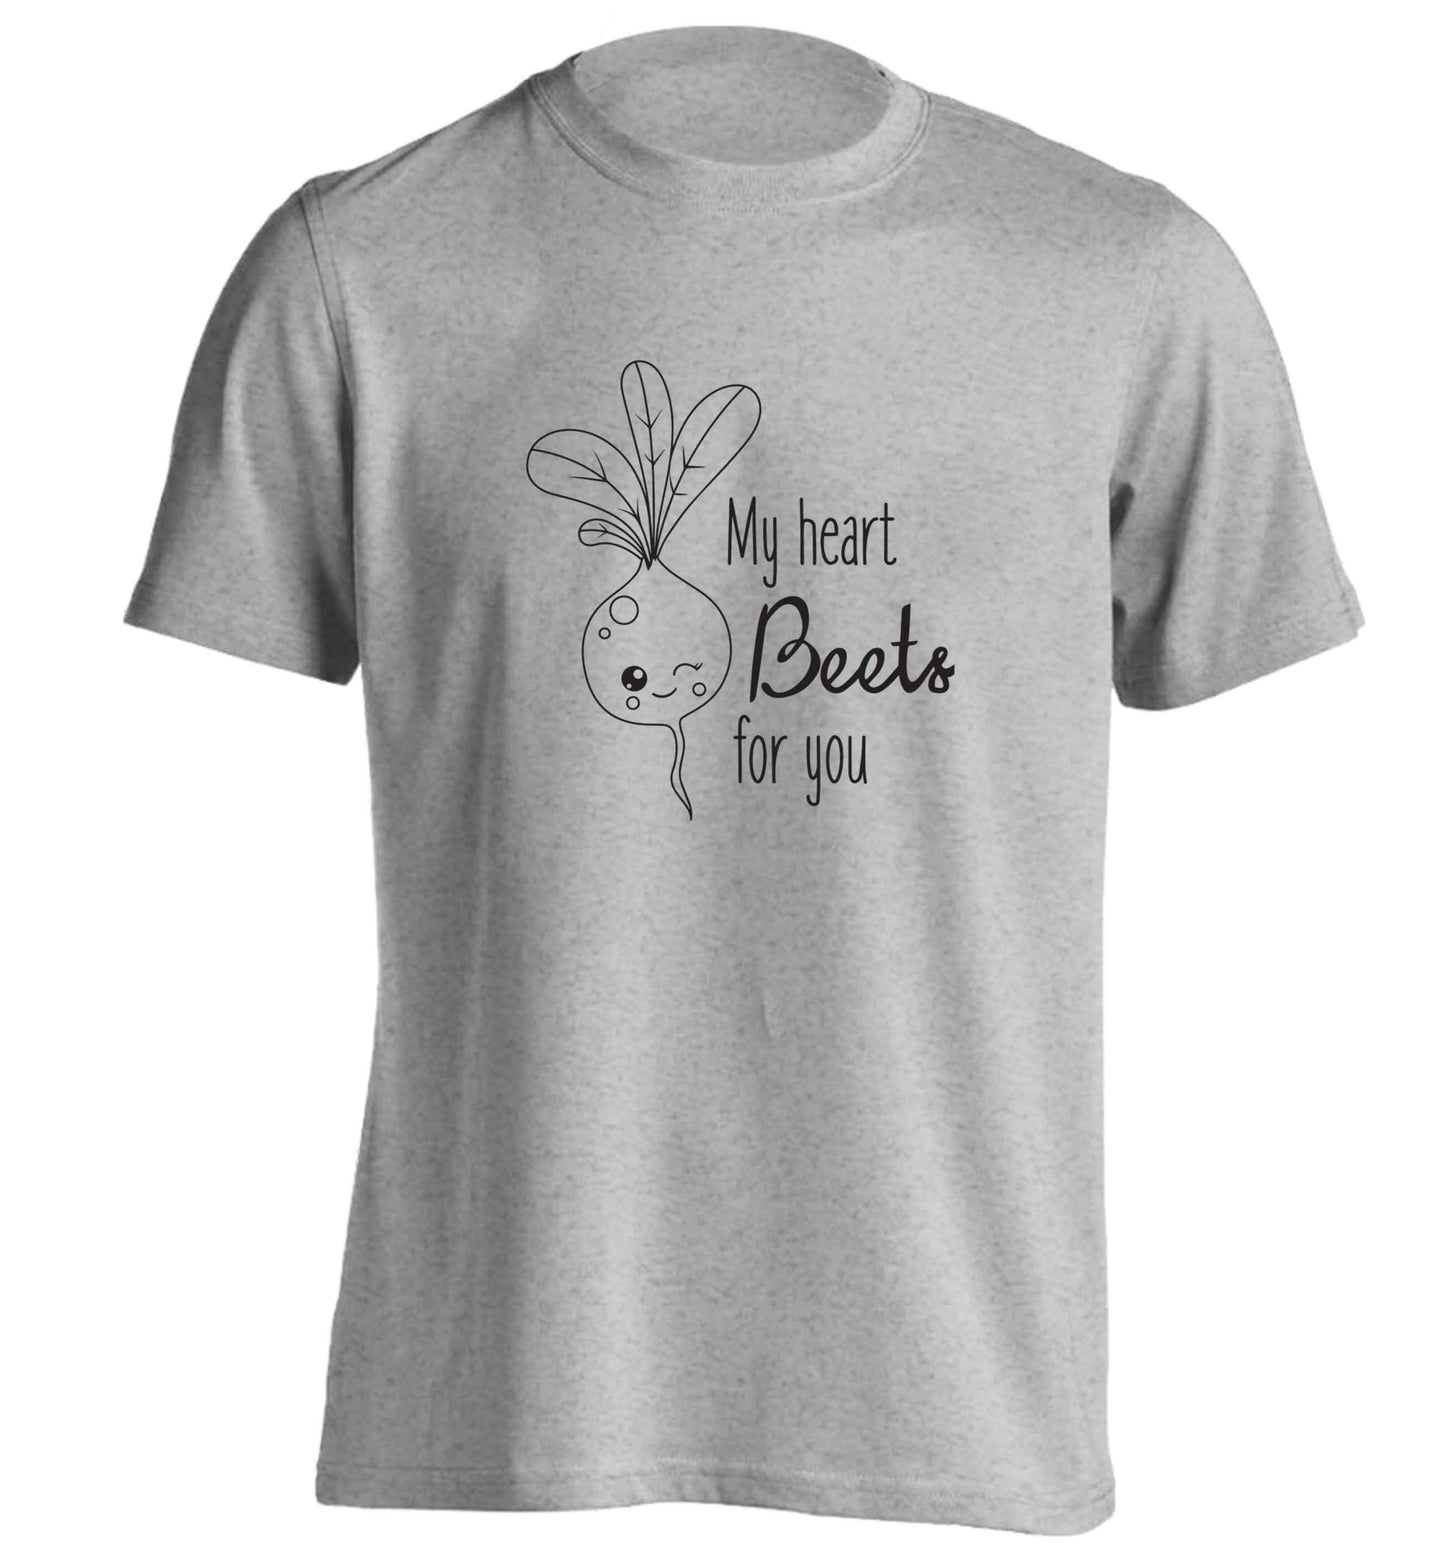 My heart beets for you adults unisex grey Tshirt 2XL